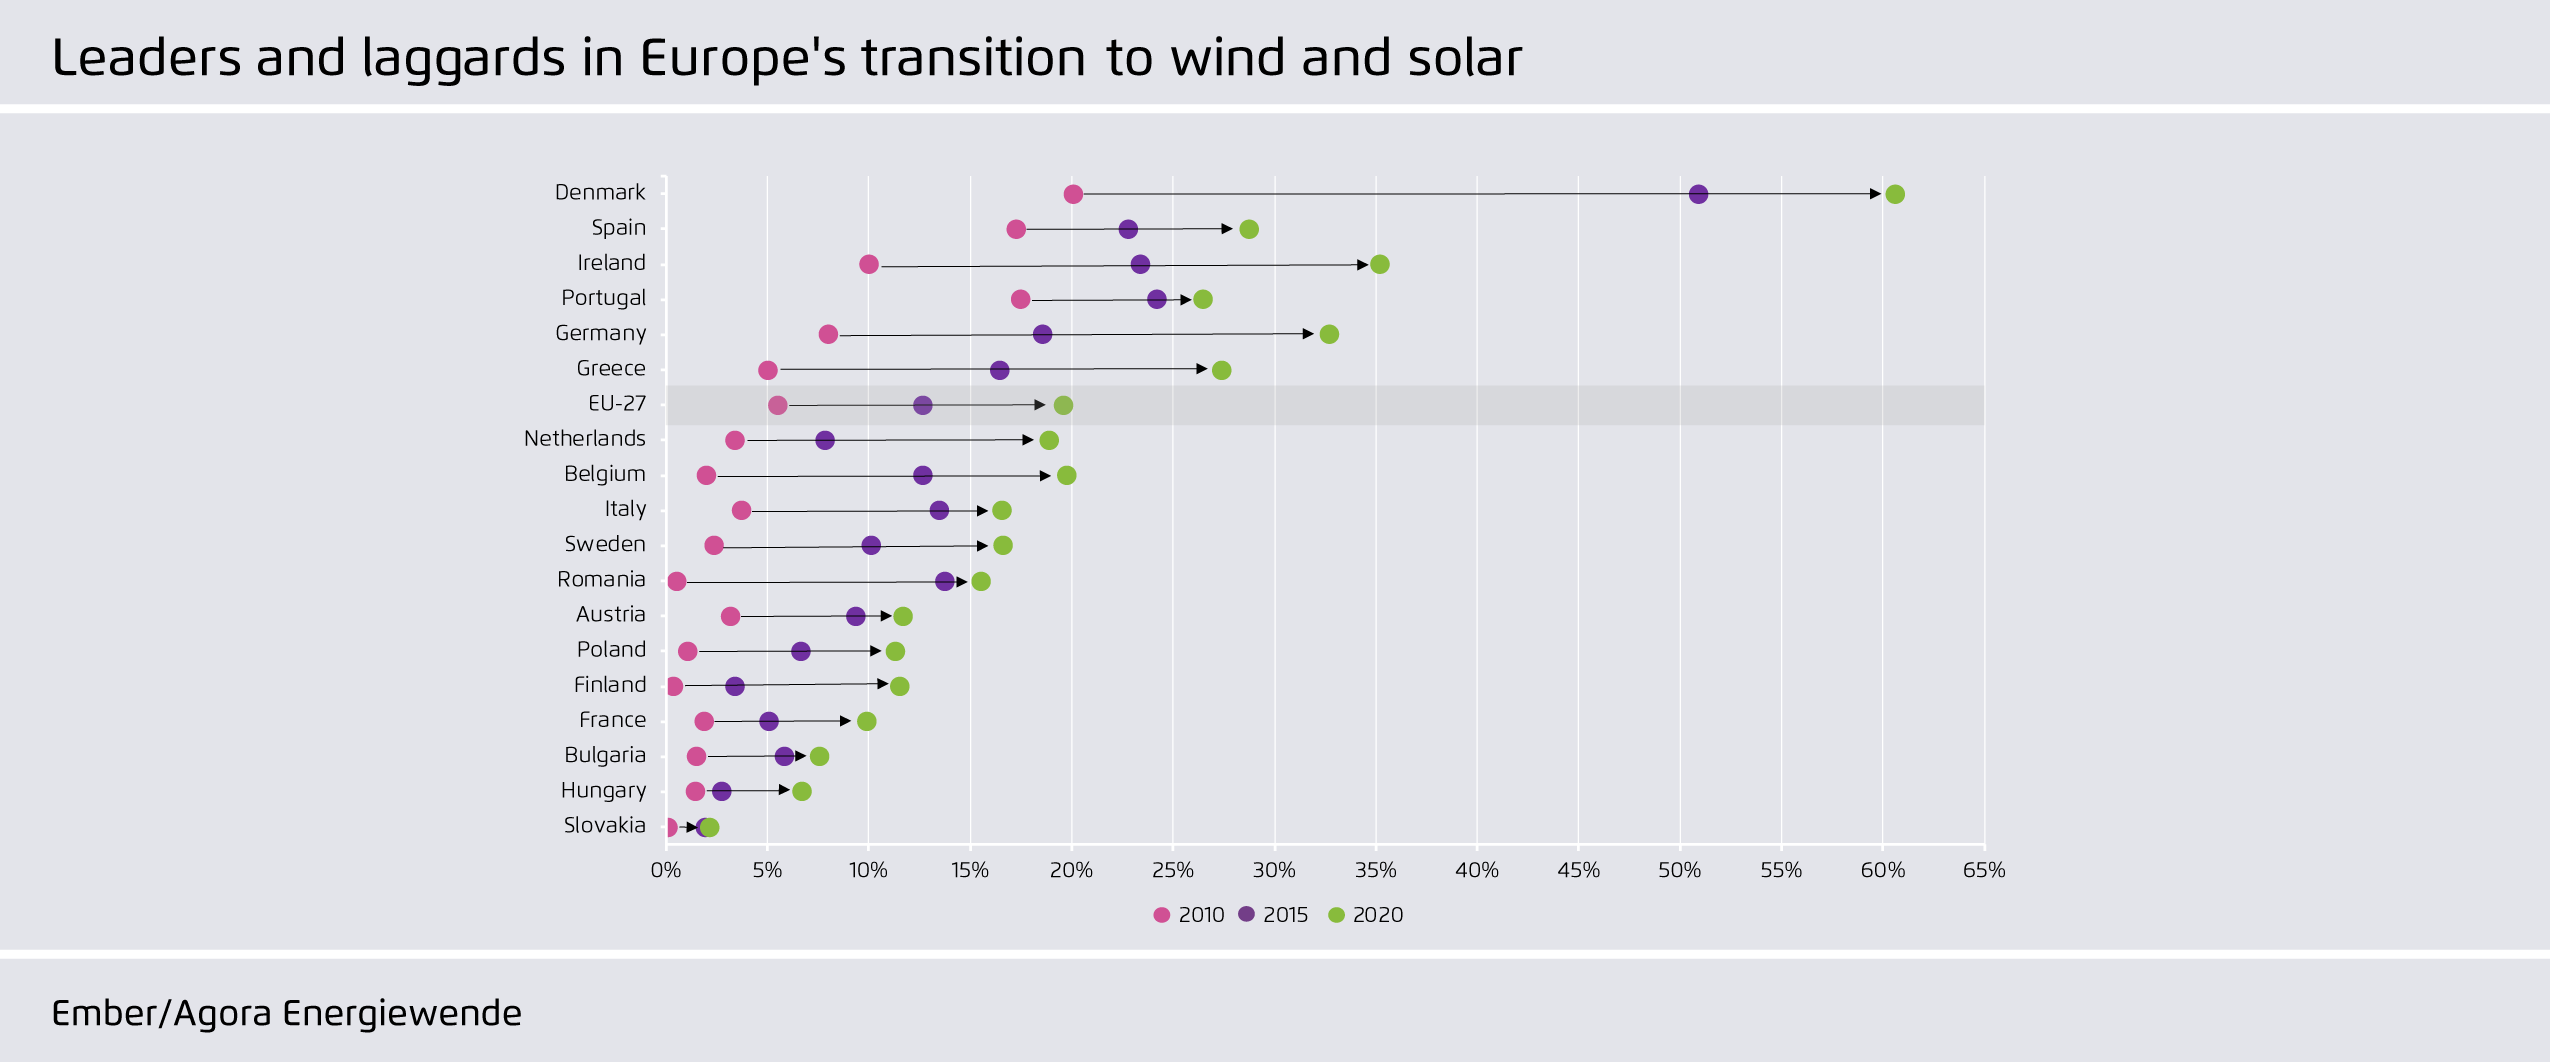 Preview for Leaders and laggards in Europe's transition to wind and solar